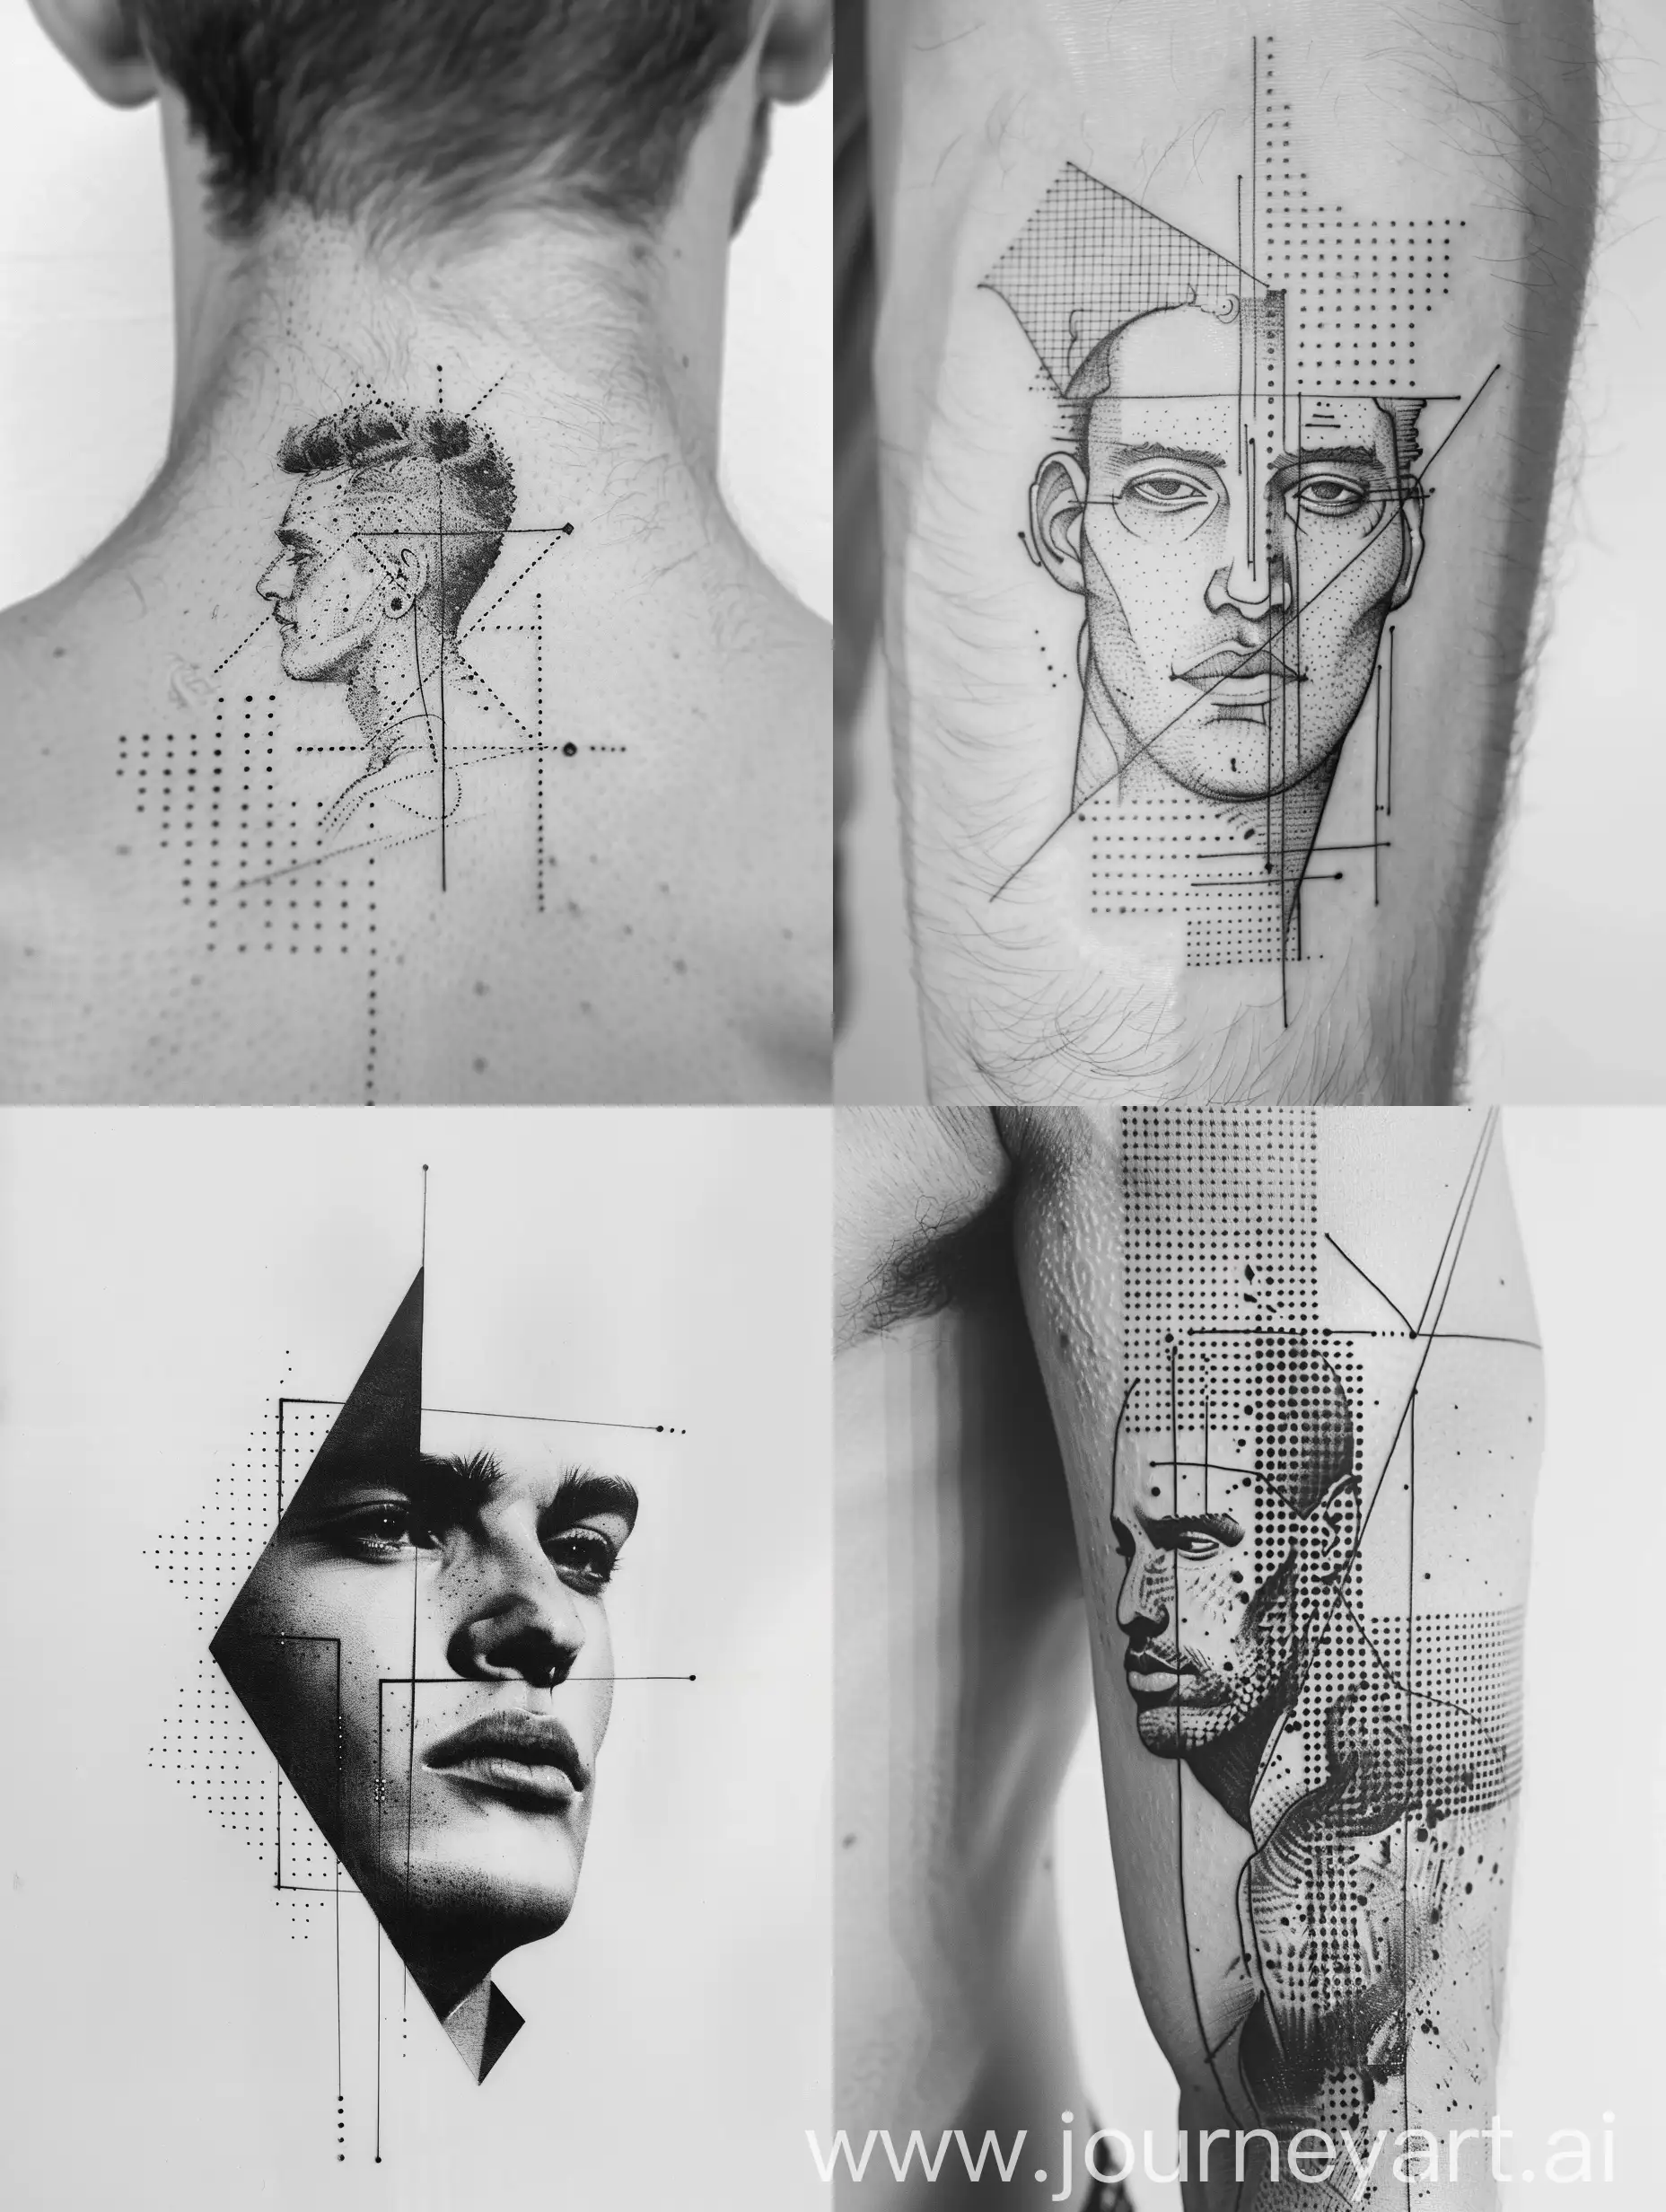 Minimalist-Black-and-White-Tattoo-Design-of-a-Man-with-Geometric-Shapes